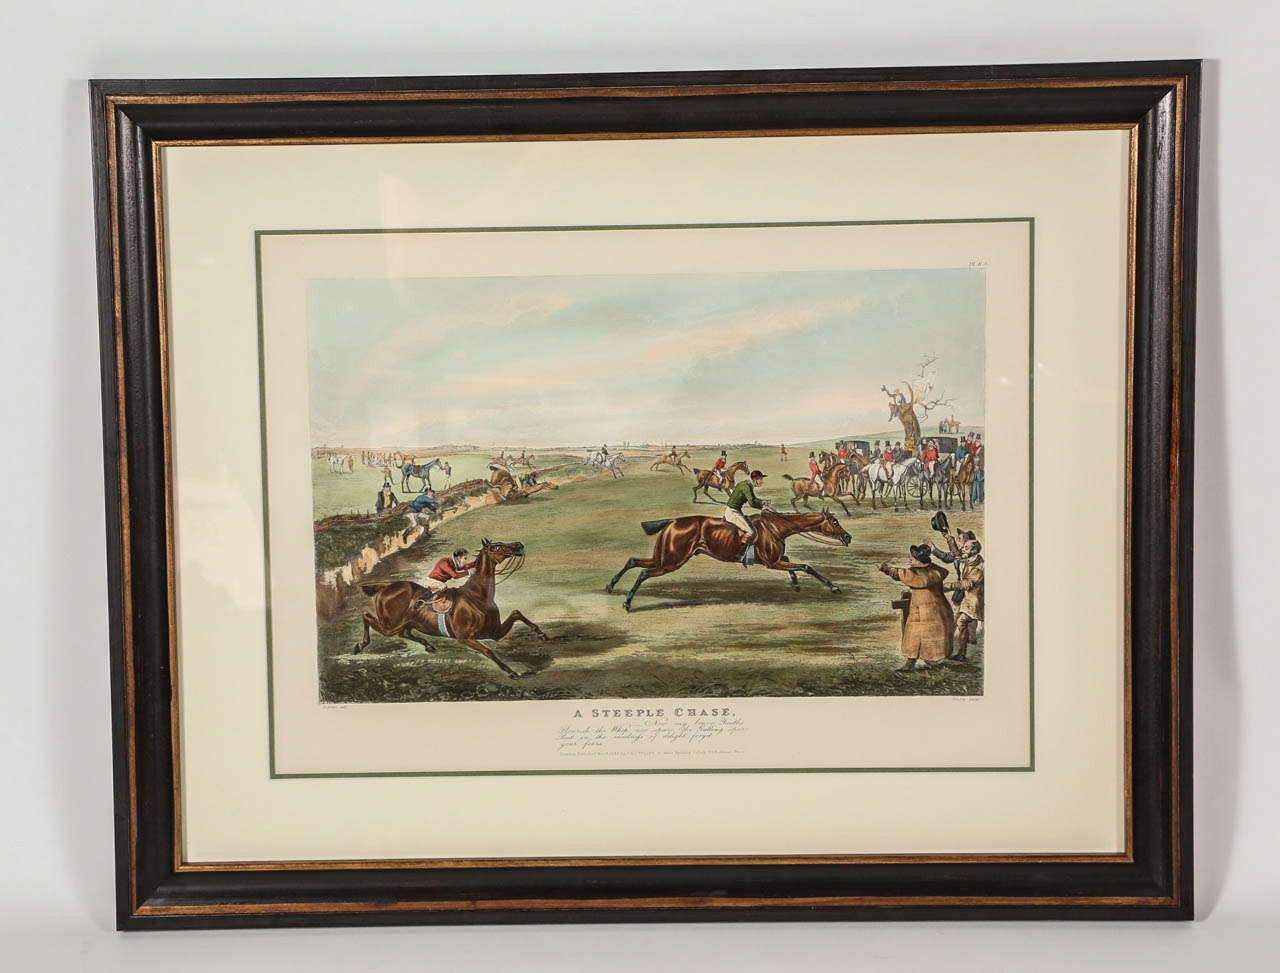 This hand-colored etching depicts the finish line of the race. By Henry Thomas Alken and printed by S & J Fuller Publishers. Title reads 